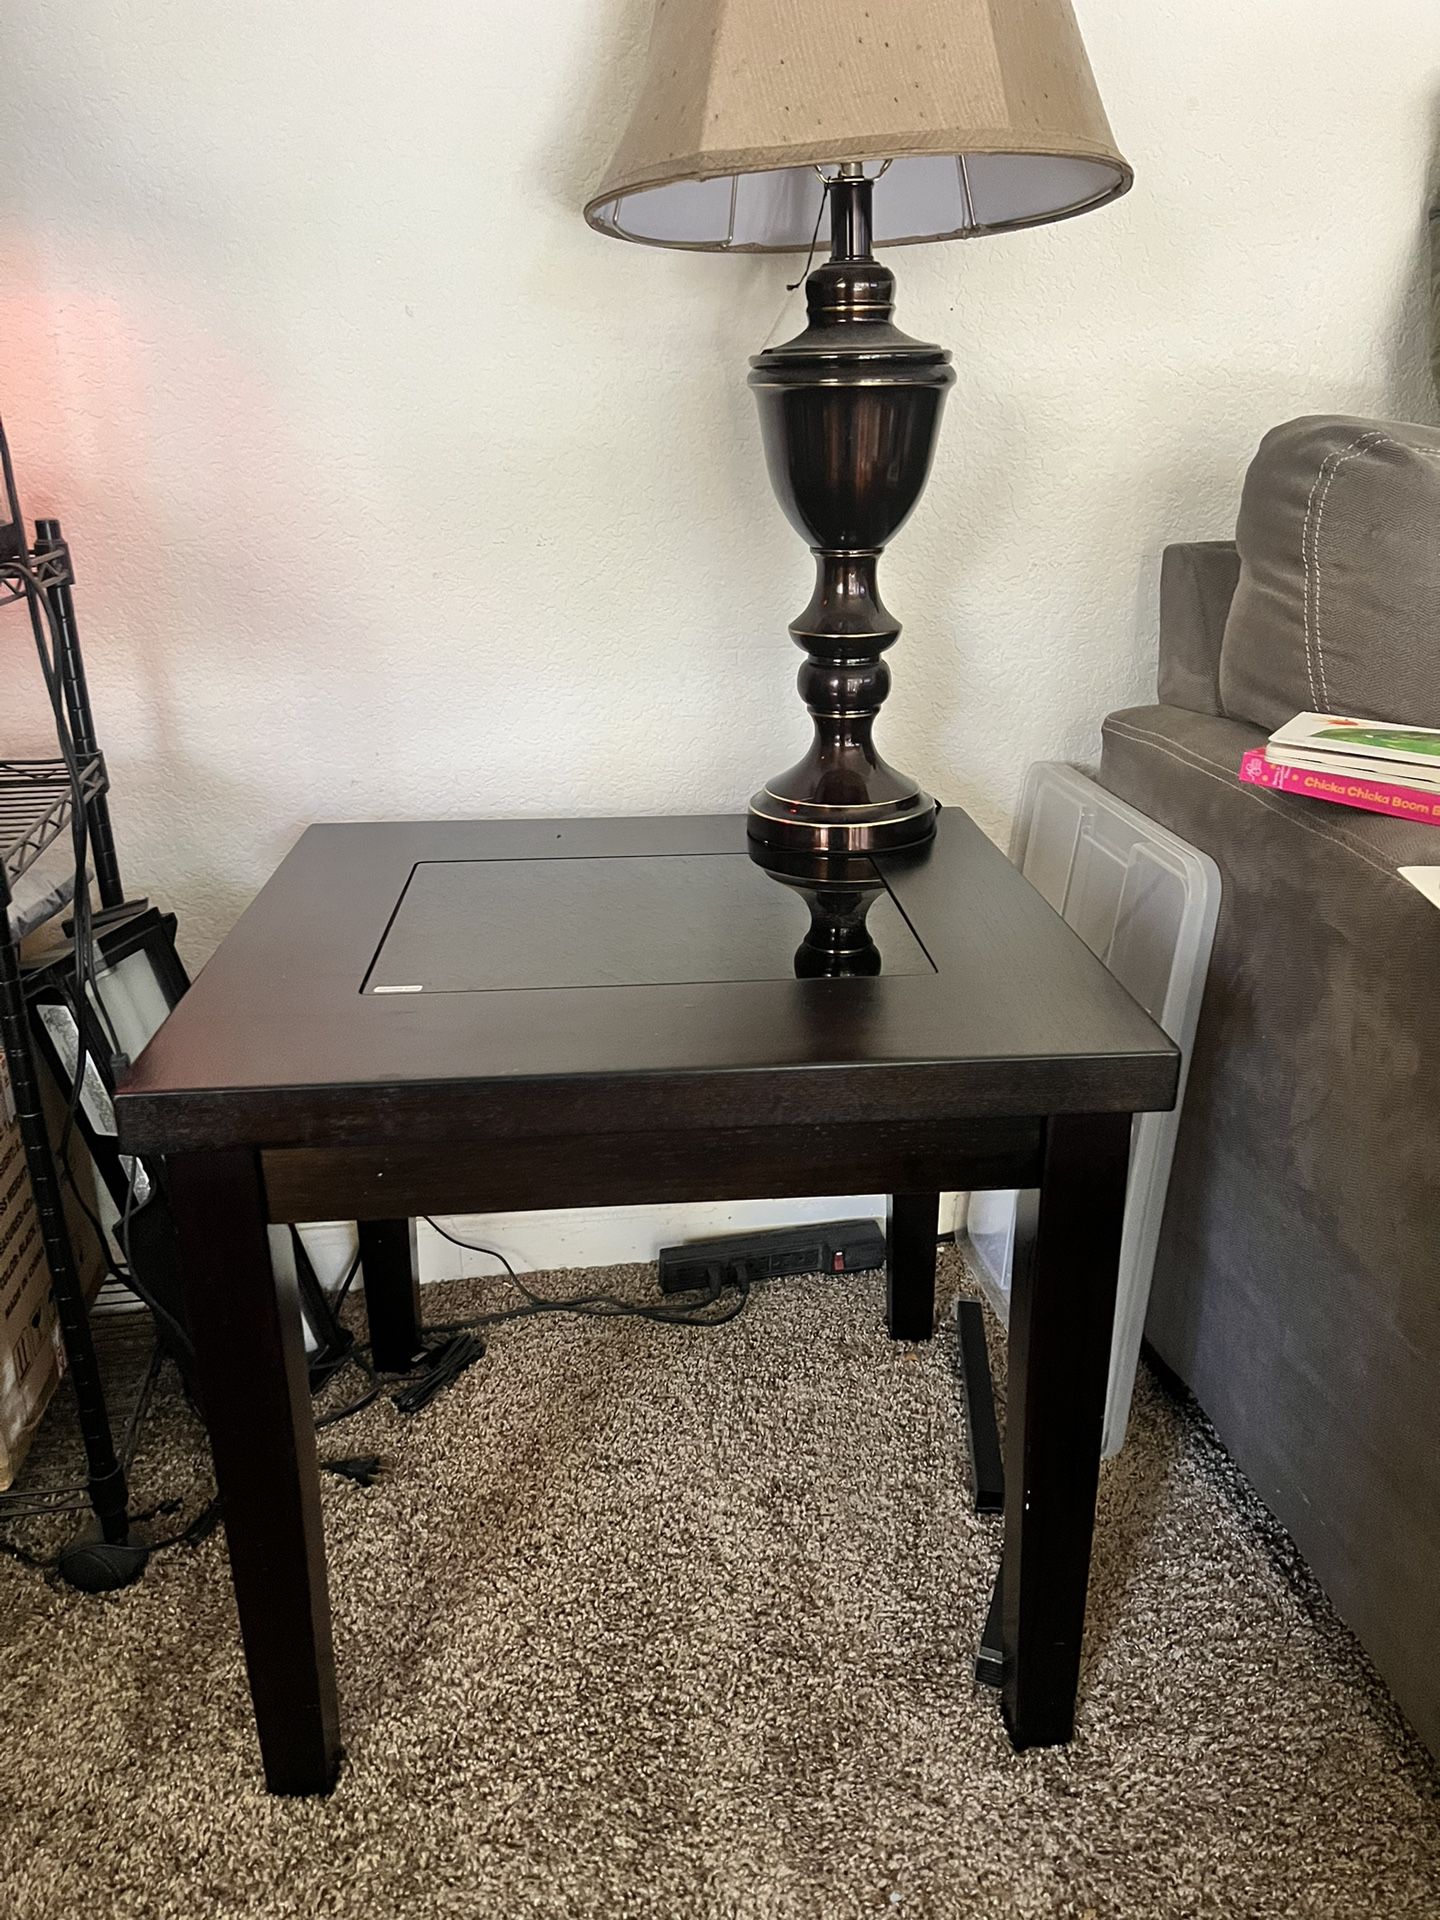 1 Coffee table, 2 End Tables And 2 Lamps Matching Set